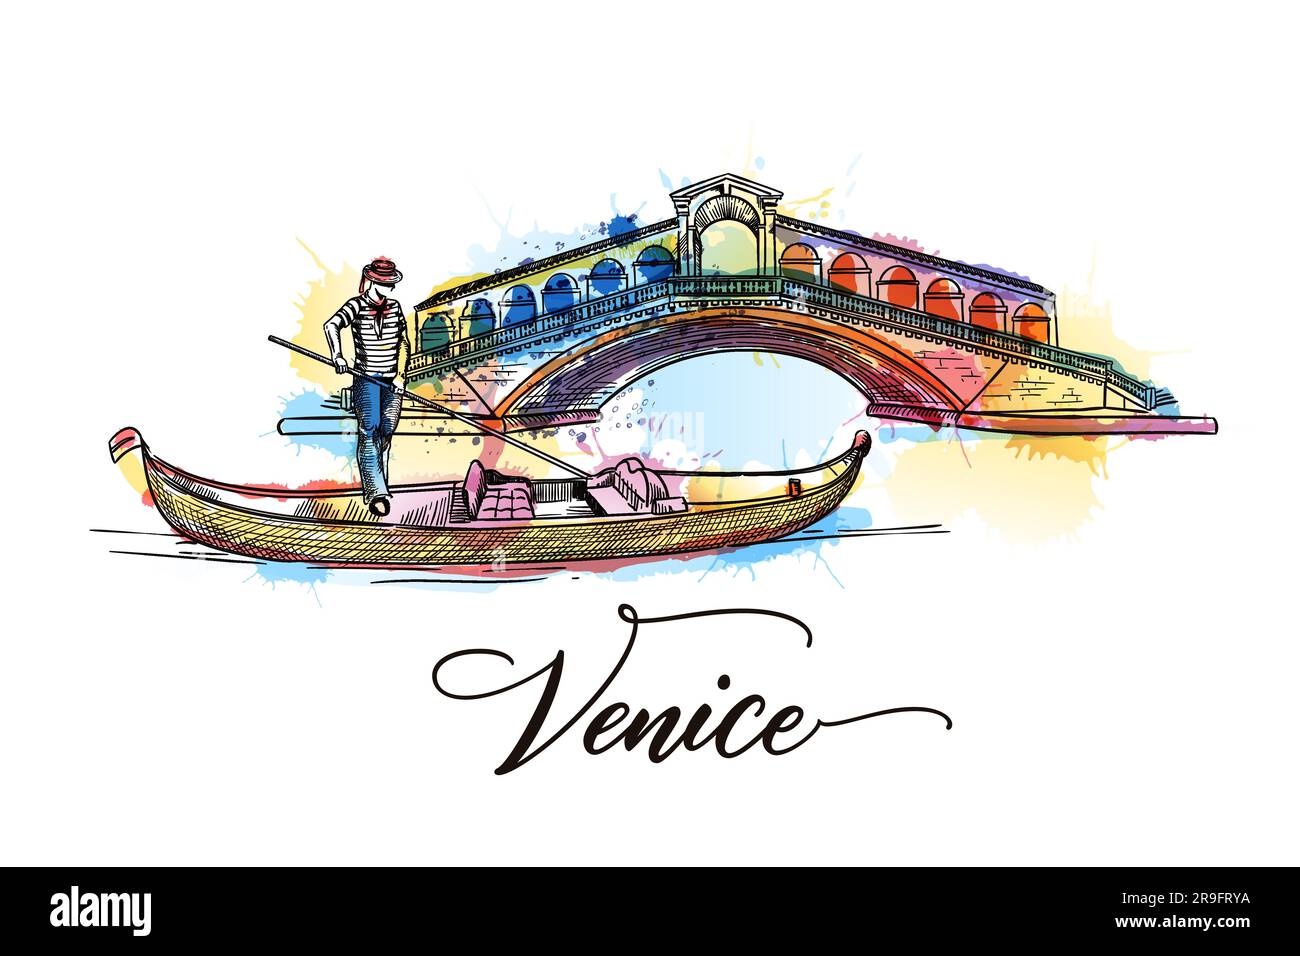 Travel to Italy Venice poster, greeting card, print with hand drawn calligraphy lettering. Vector sketch illustration of Rialto Bridge, gondola, gondo Stock Vector